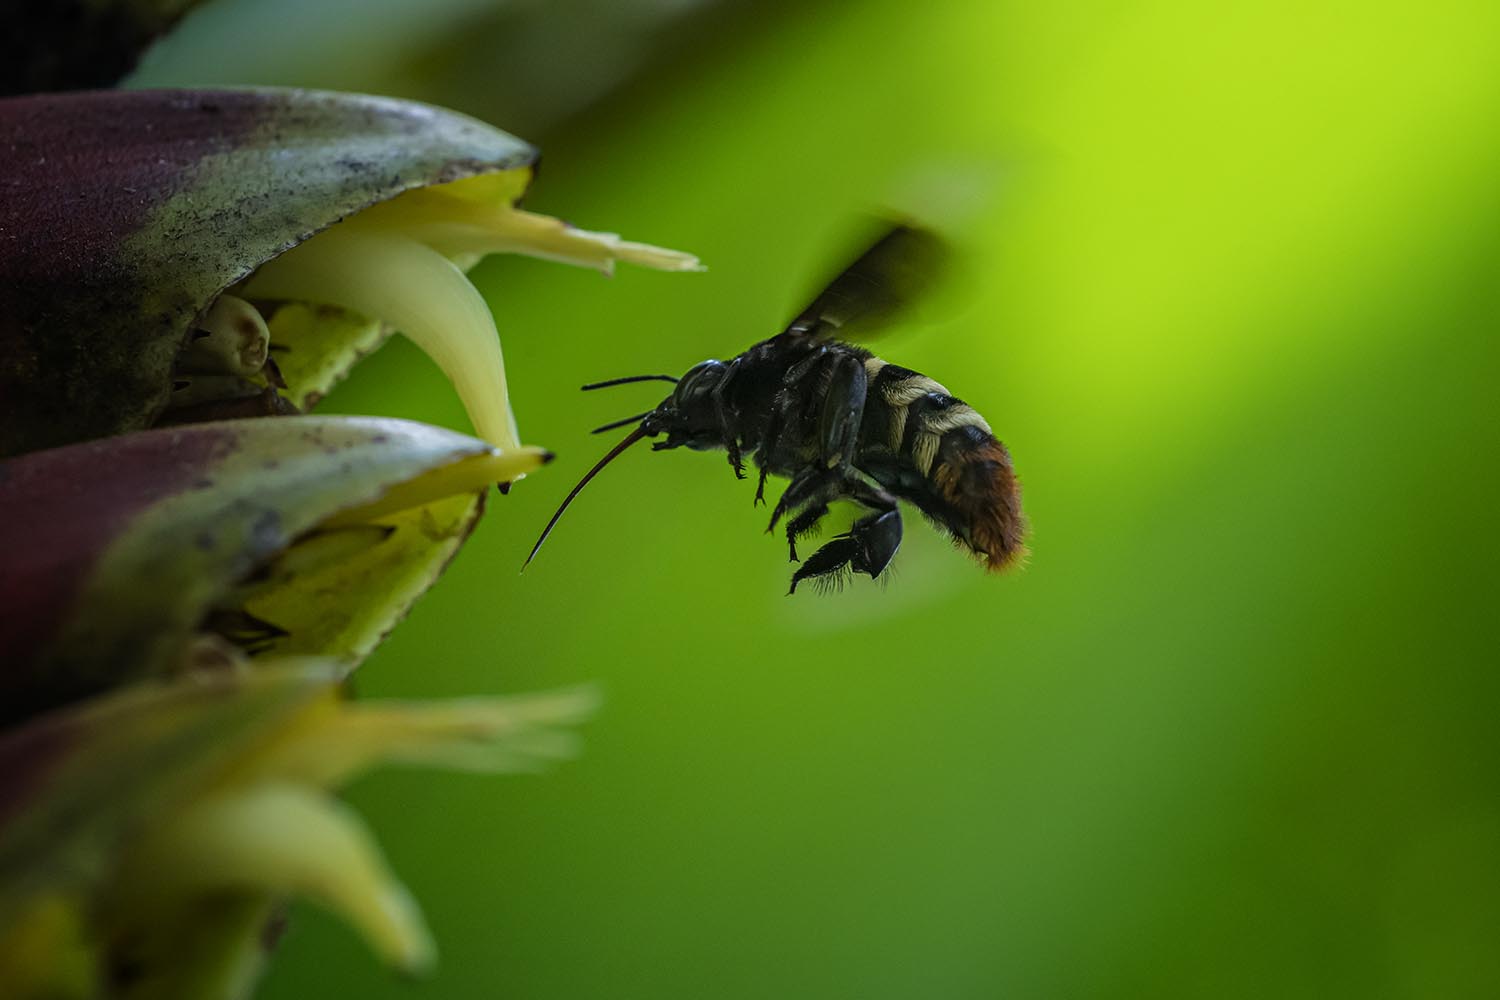 A wasp approaching a flower